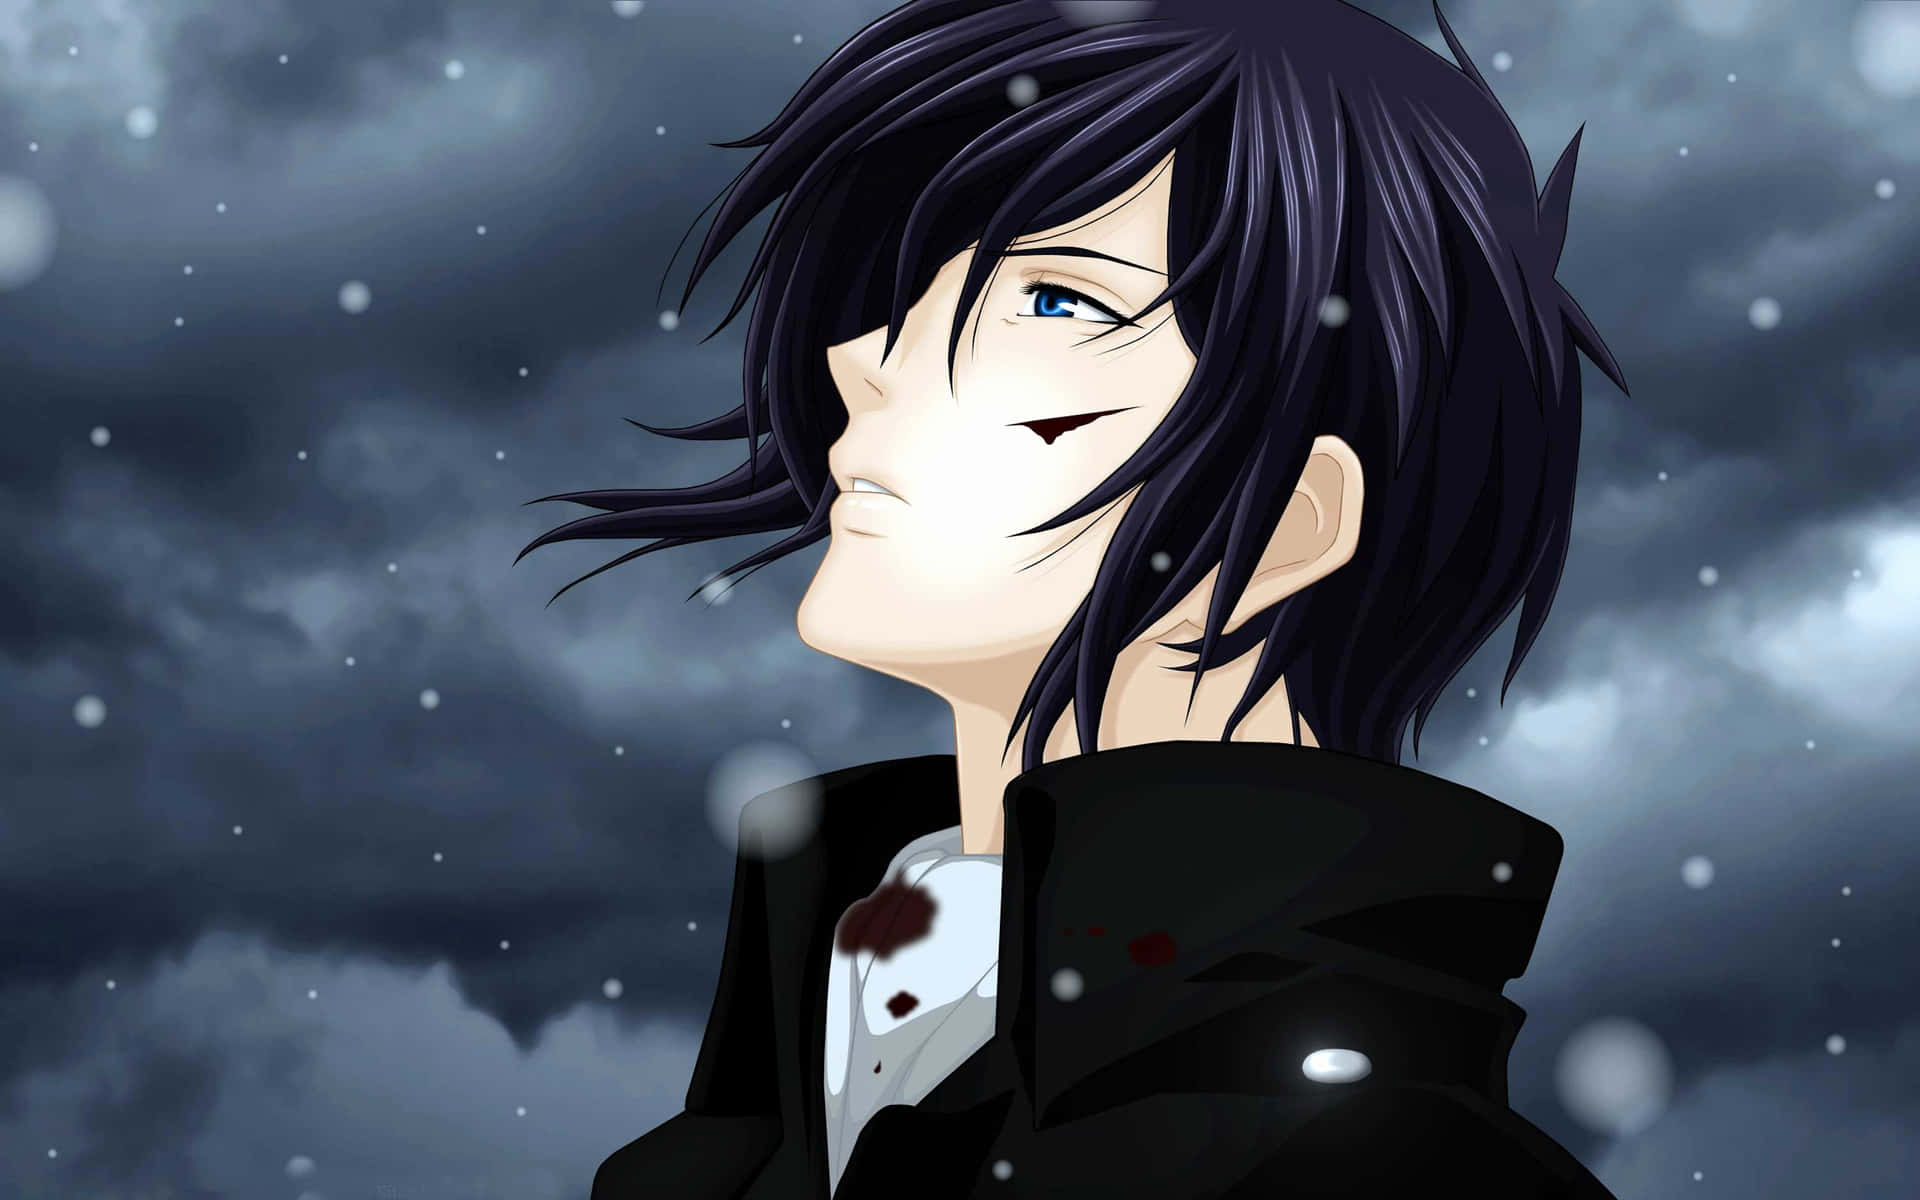 A Man With Black Hair Standing In The Snow Wallpaper